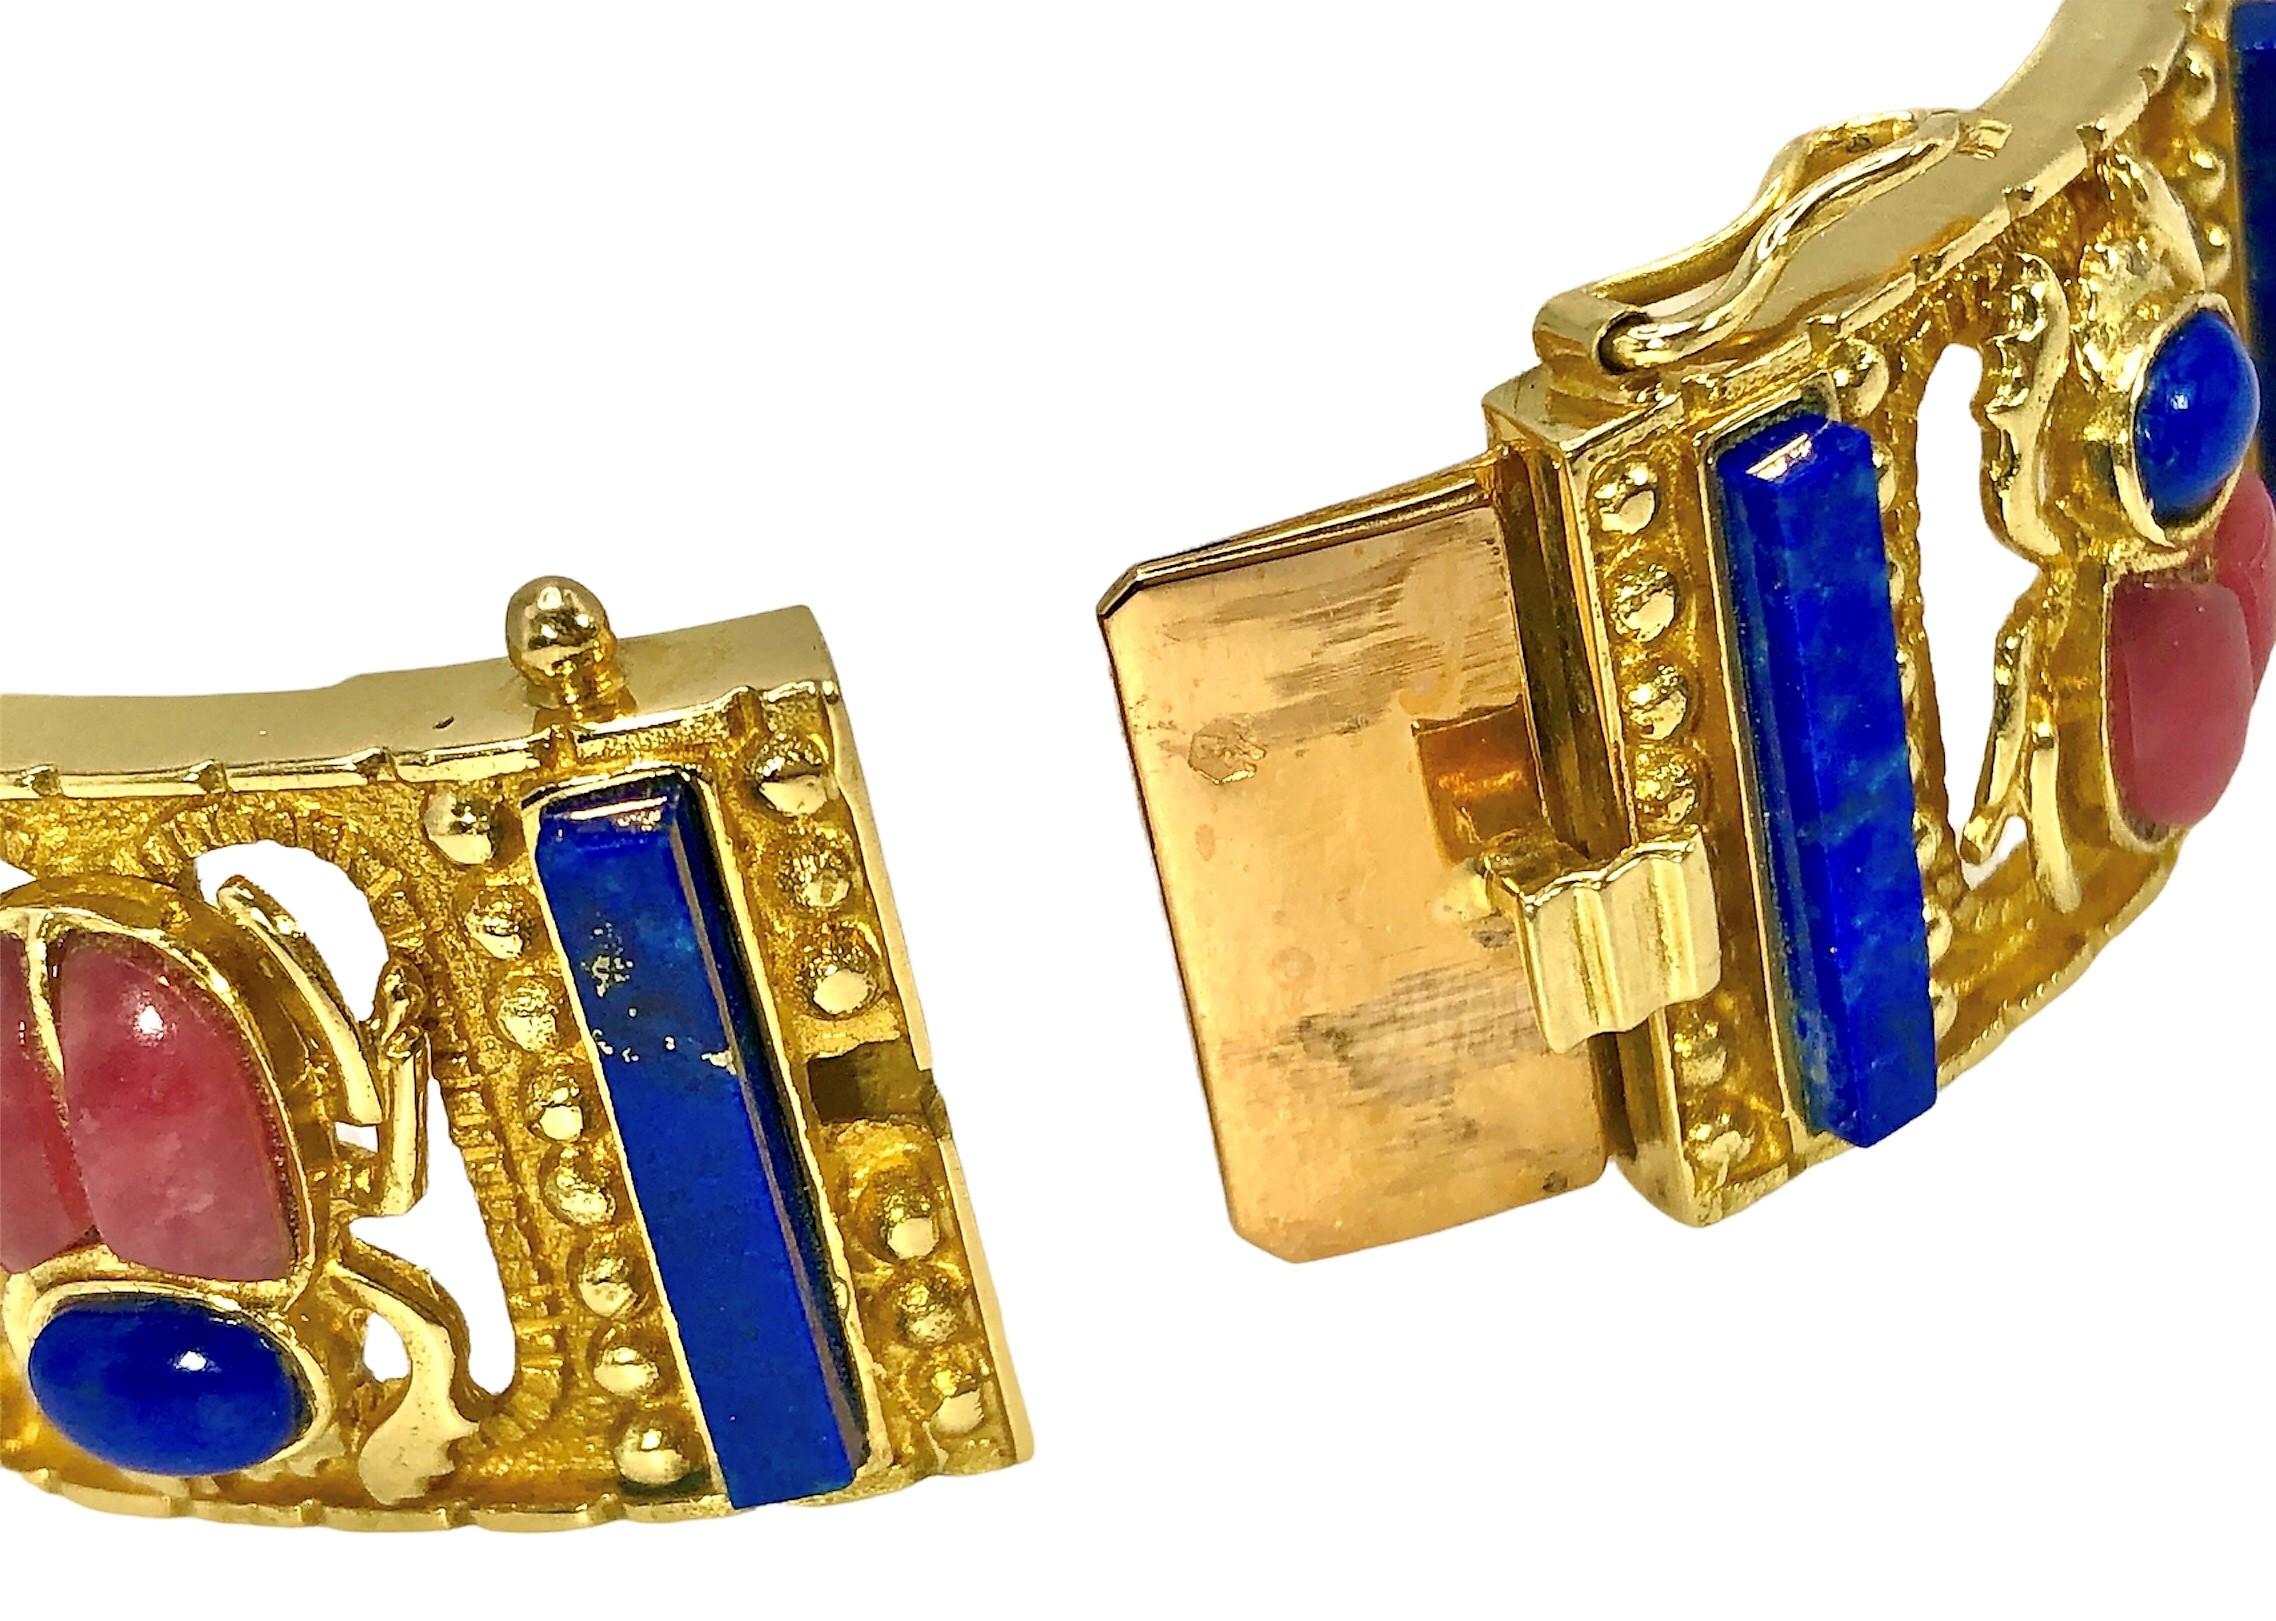 Egyptian Style 18k Yellow Gold, Lapis Lazuli & Rhodonite Scarab Beetle Bracelet In Good Condition For Sale In Palm Beach, FL